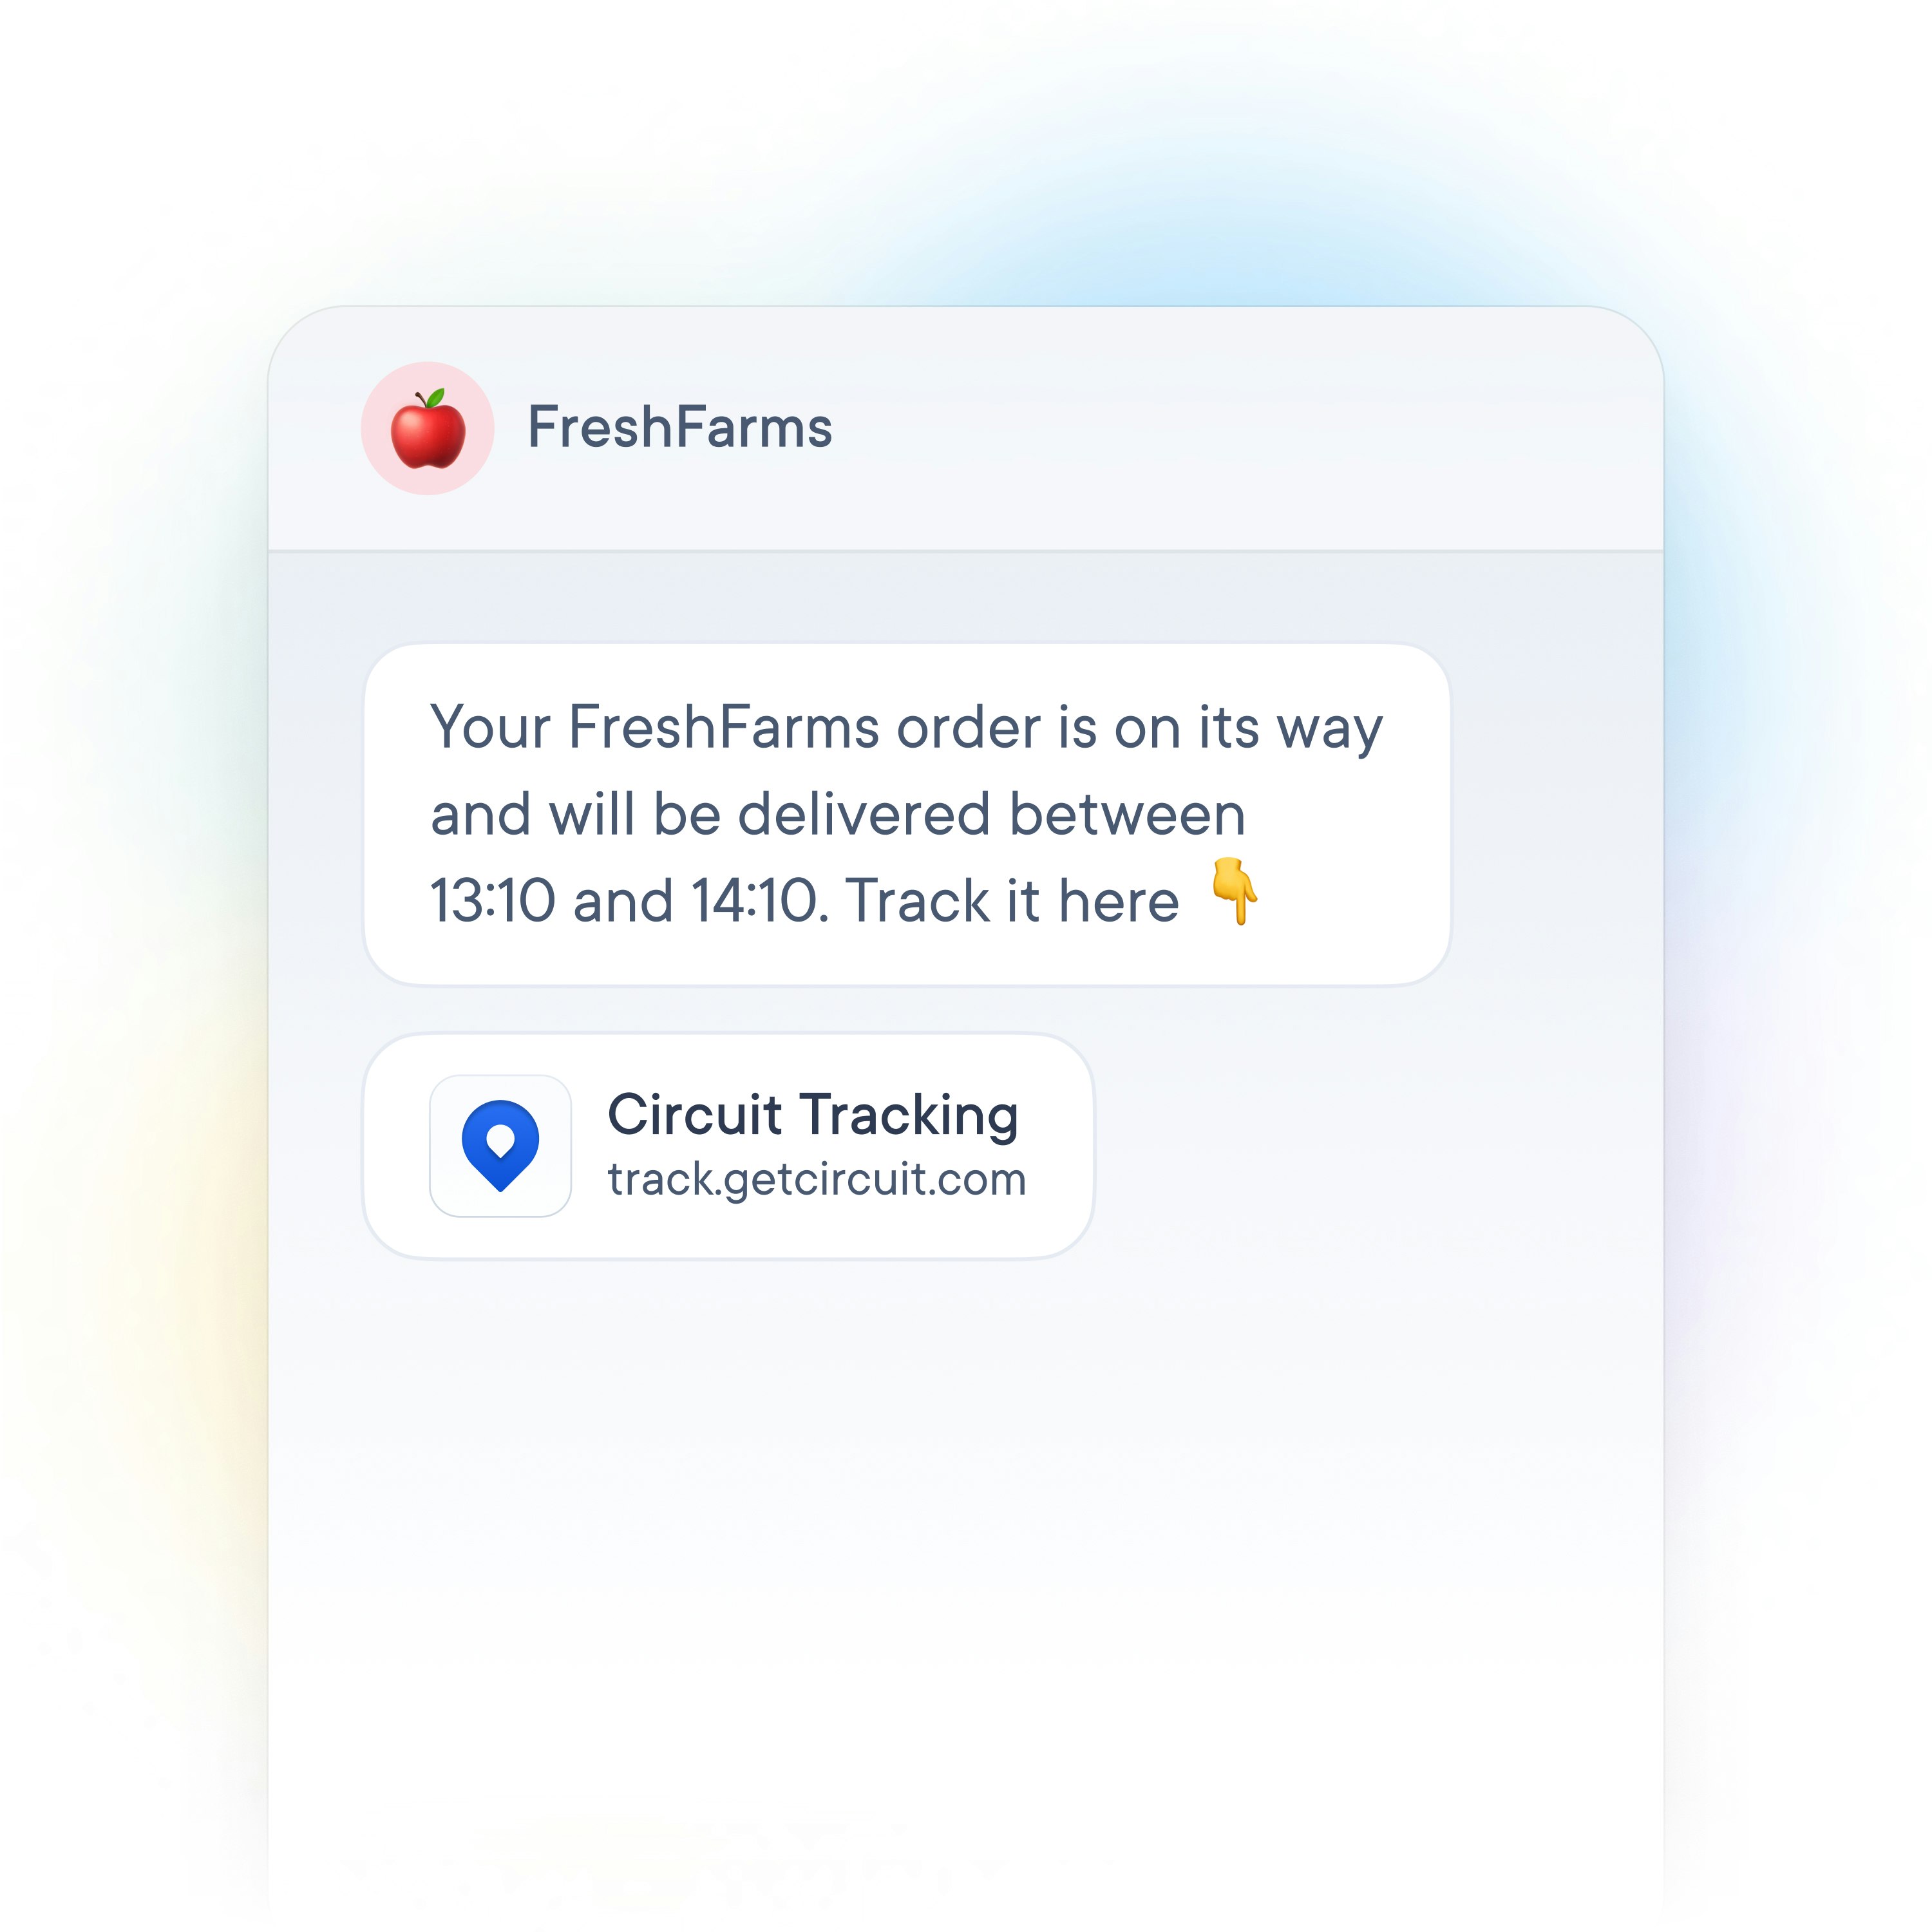 A text message that notifies the recipient that their package is on its way and will be delivered between 13:10 and 14:10. There is also a tracking link.